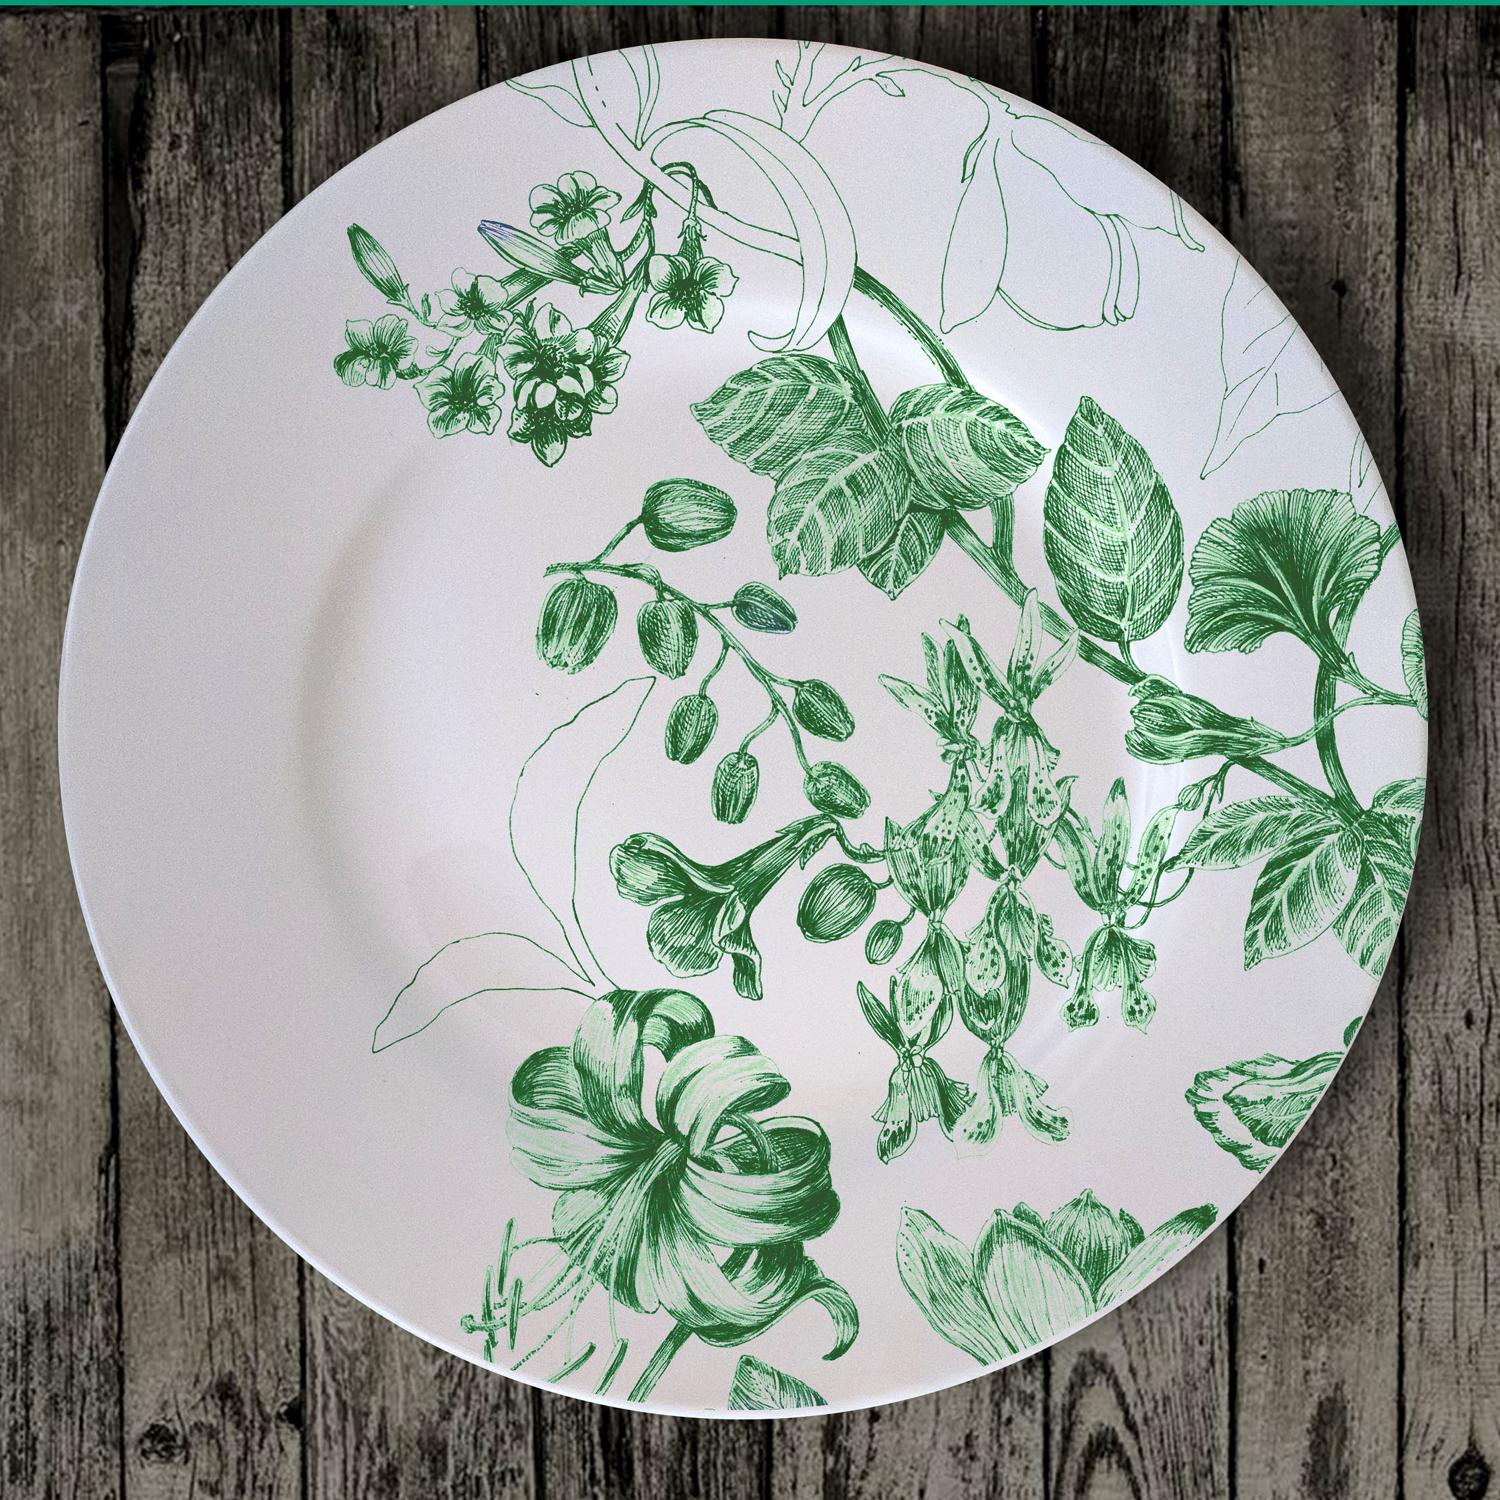 Marie Antoniette dinner plates, are designed as the porcelain set of a contemporary Queen Marie Antoniette, still alive in 2020. It is an explosion of detailed flowers and blossoms, originally hand-painted with an engraving technique that is some